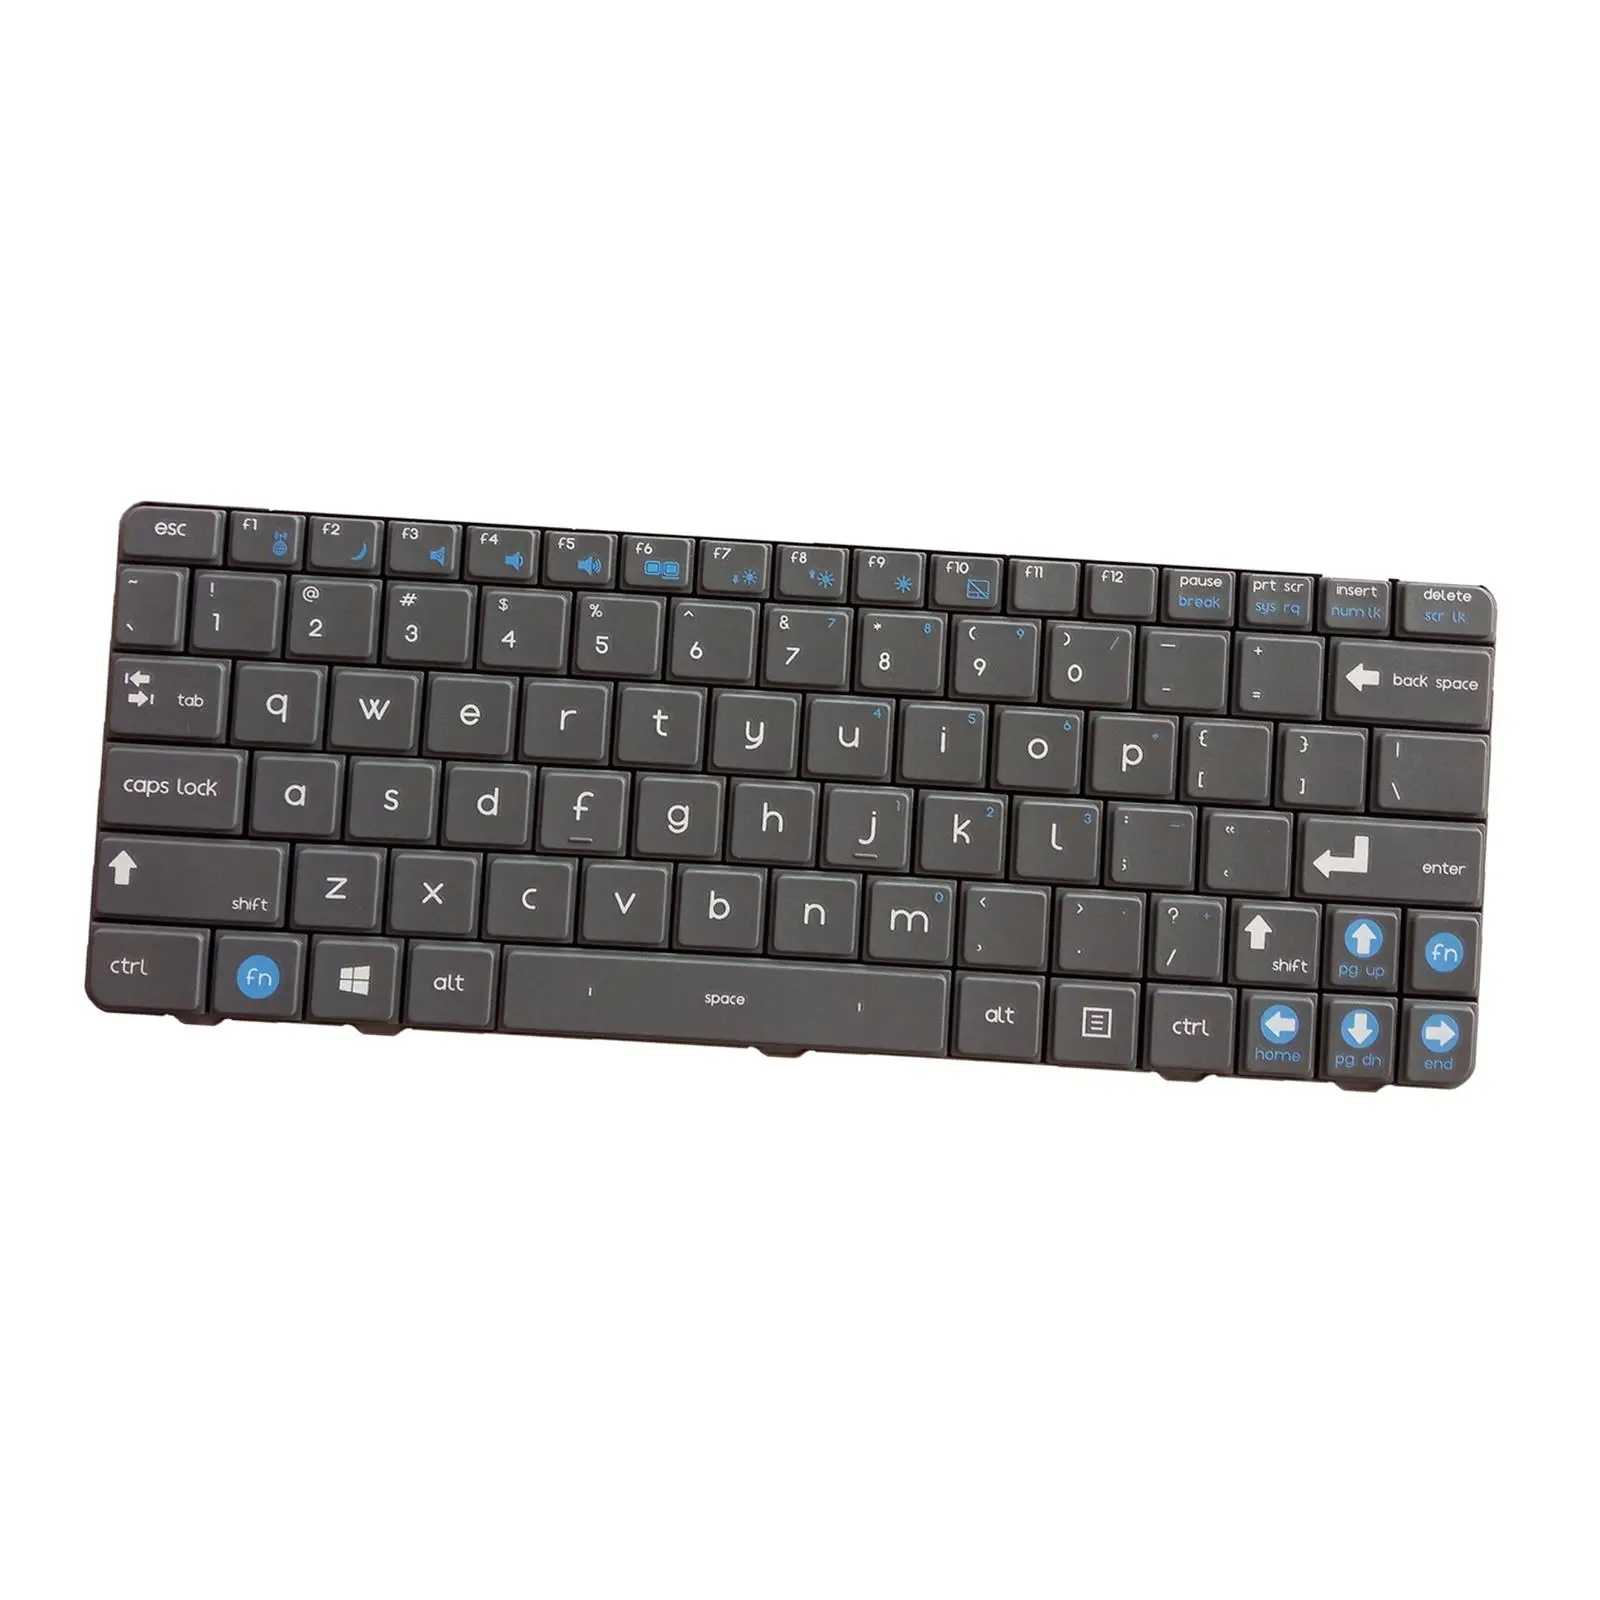 US Layout Laptop Keyboard Replaces for N230 N210 Durable Parts Components ,Grey Easily Install